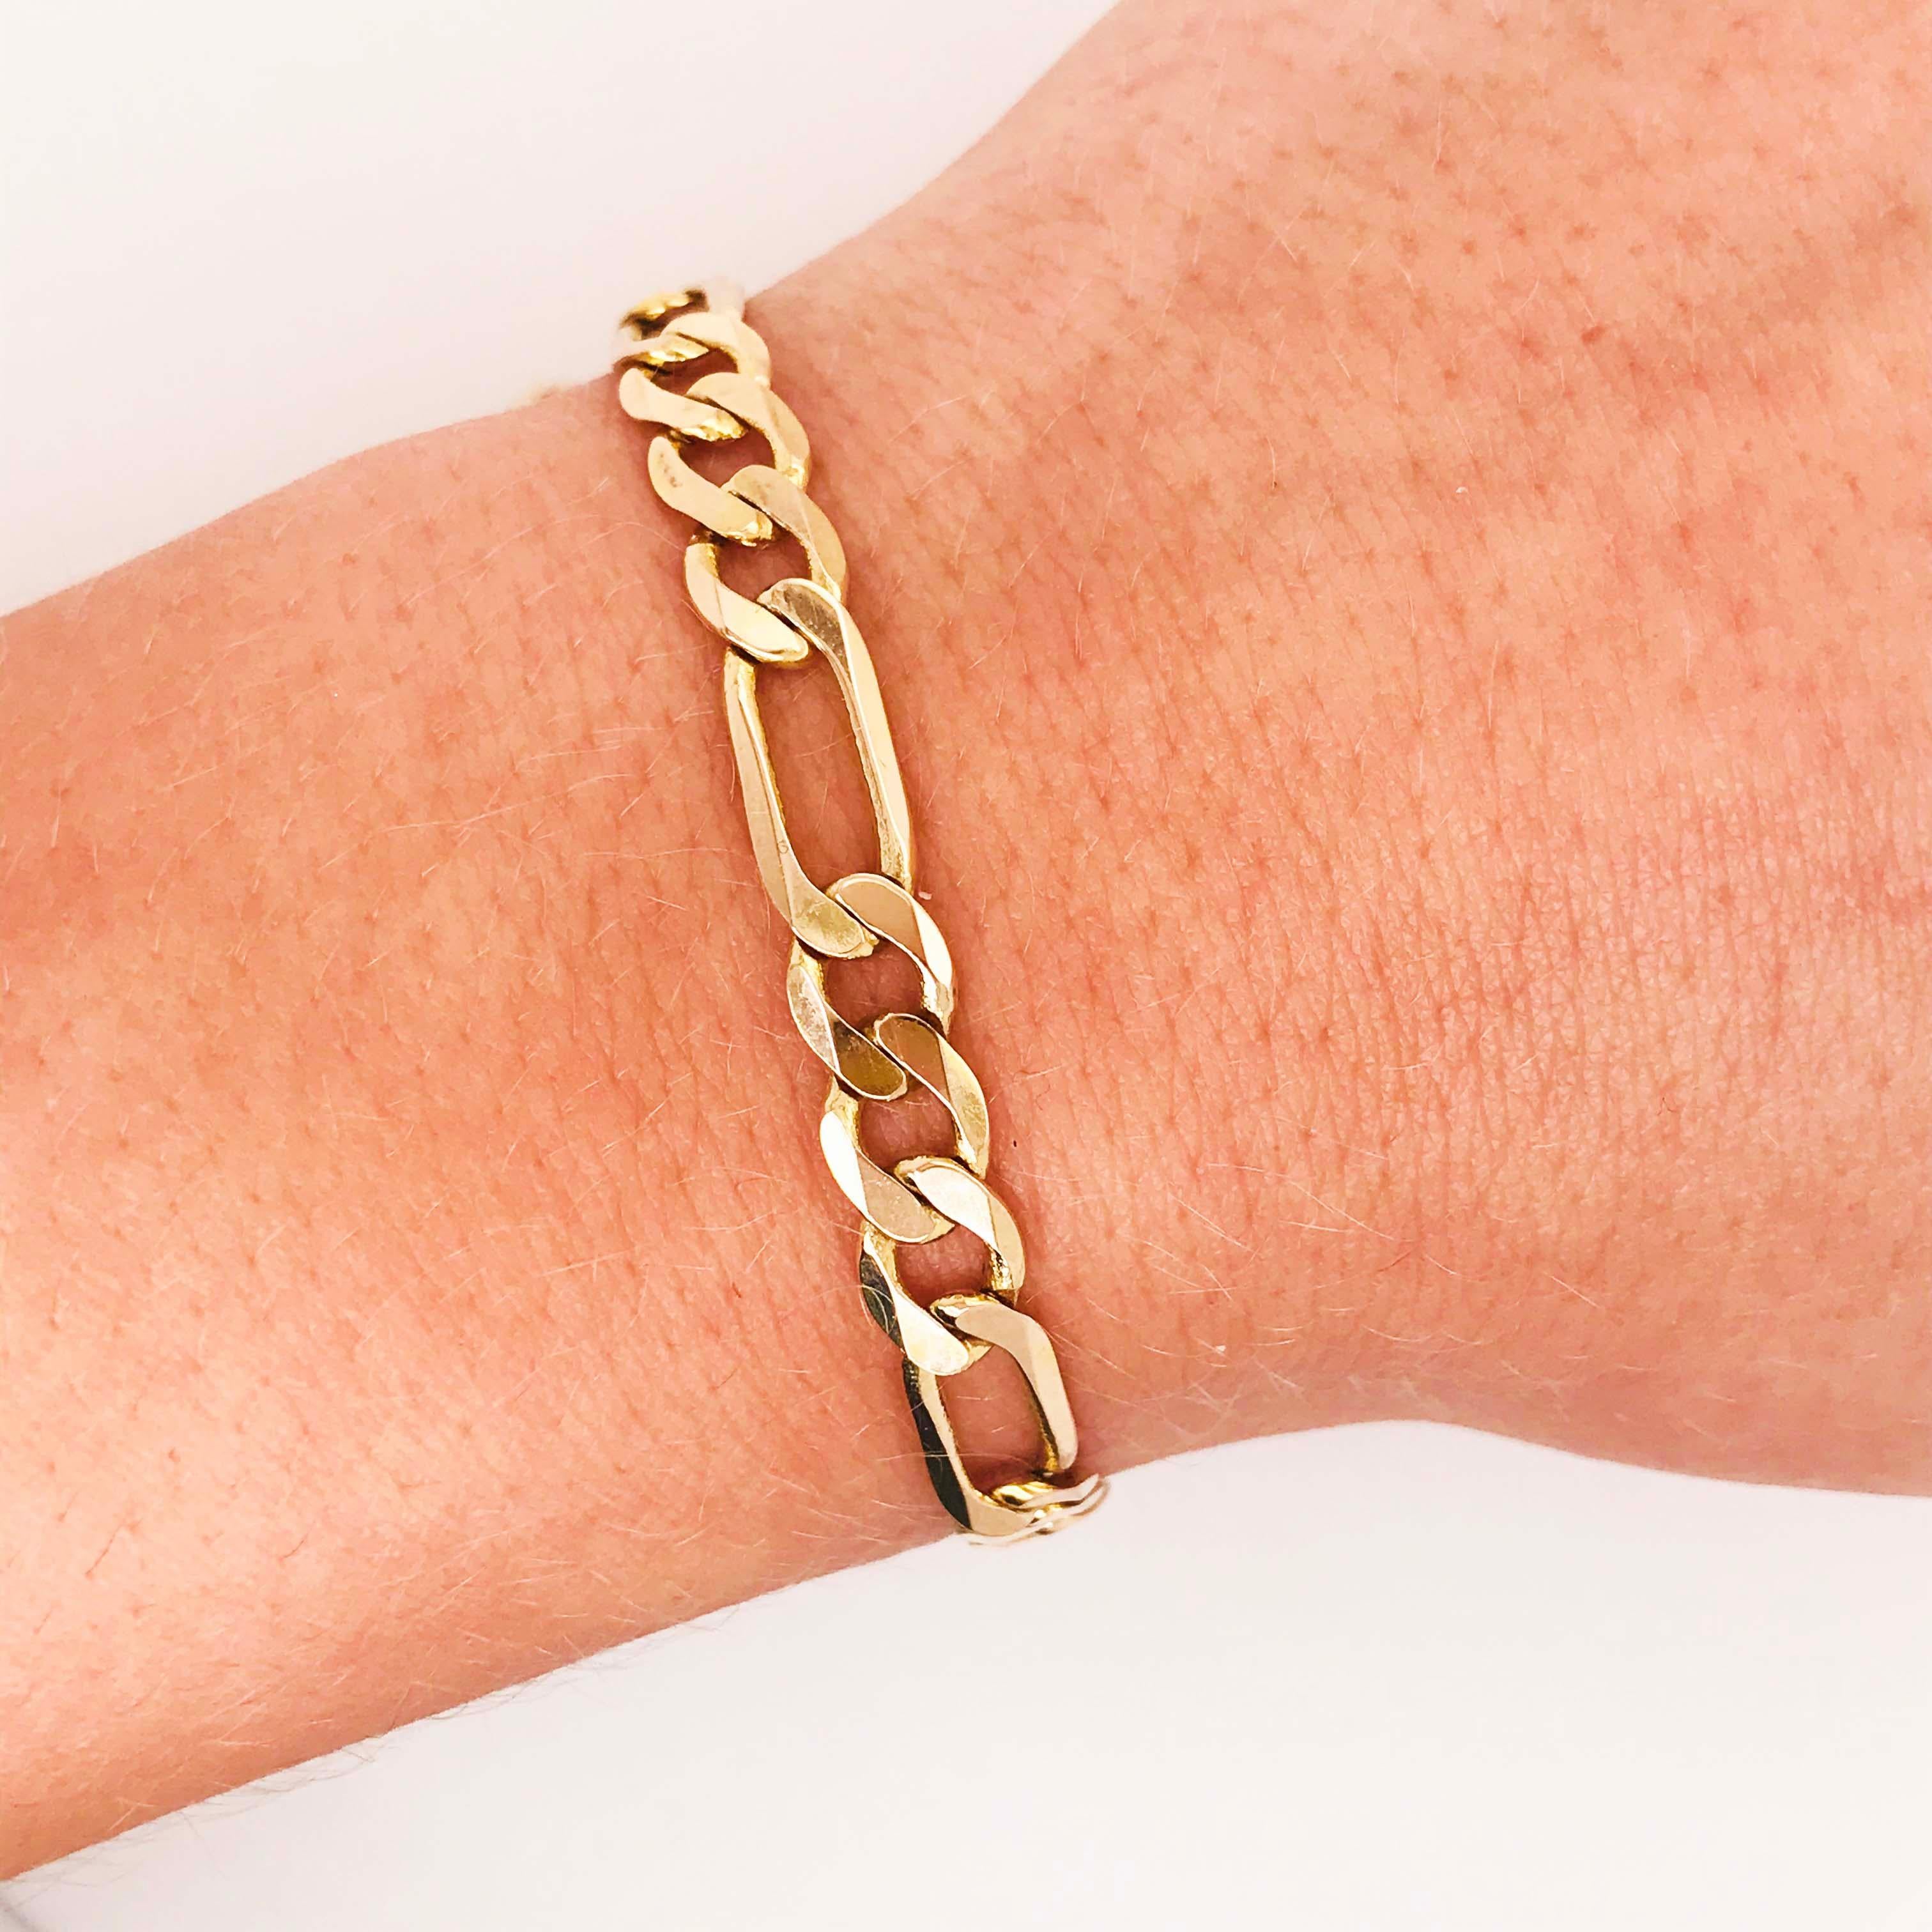 This Italian made Figaro chain link bracelet is a staple in fashion jewelry. Figaro chain bracelets have been worn for generations! They are a classic and timeless deign. This heavy Figaro bracelet has handmade links that have been made perfectly